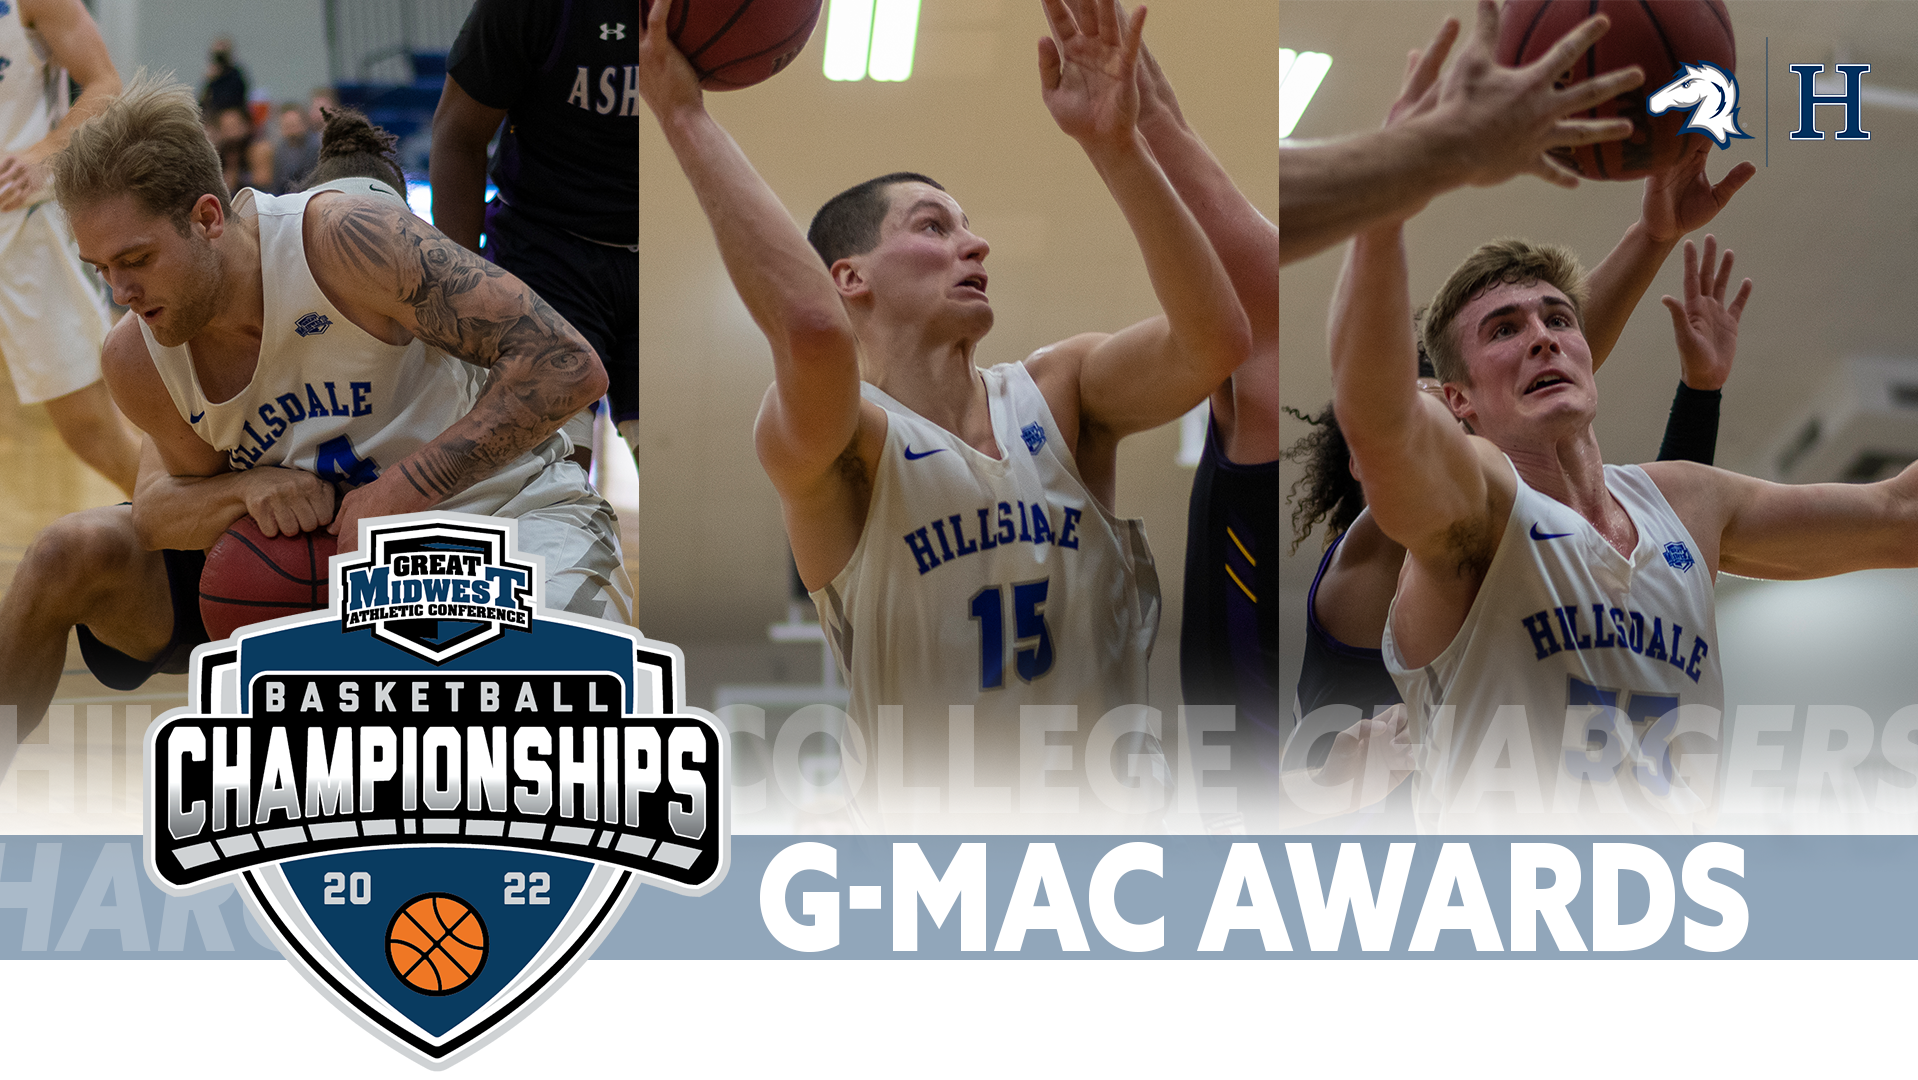 Chargers Cartier, Reuter each earn major honor from G-MAC; Yarian also named to All-G-MAC team